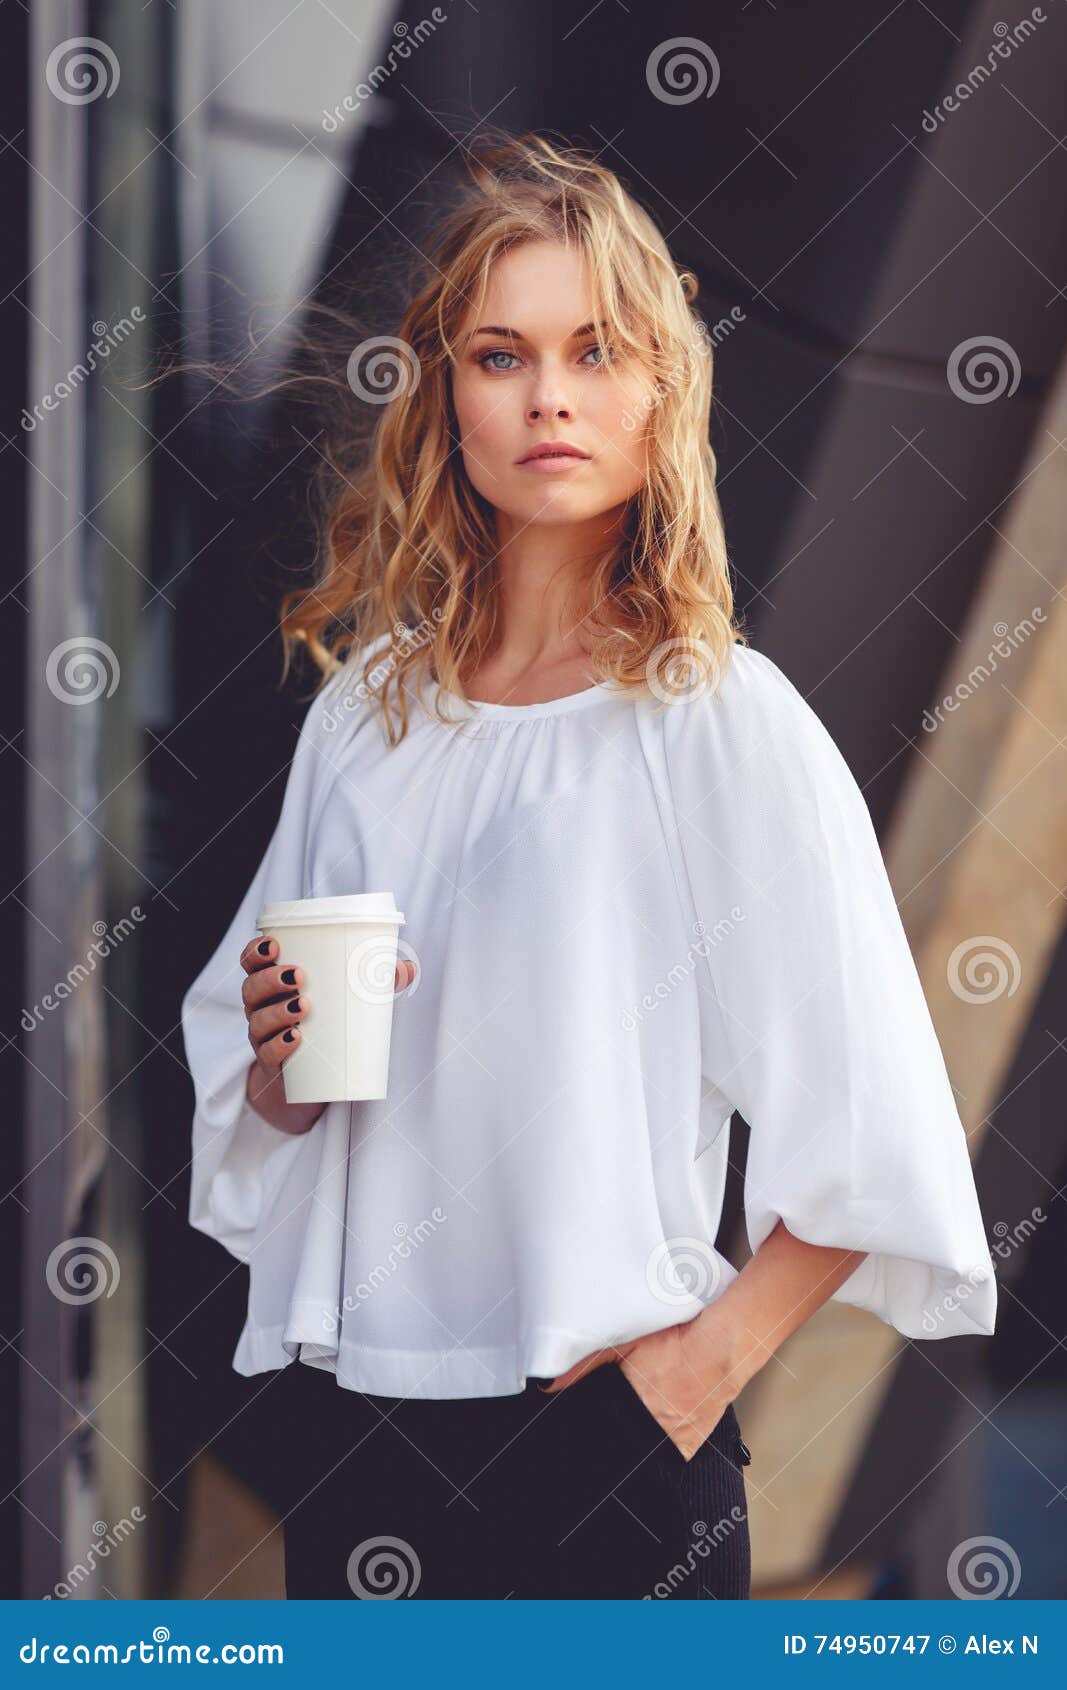 Business Woman With Wavy Blonde Hair Holding Coffee Stock Image